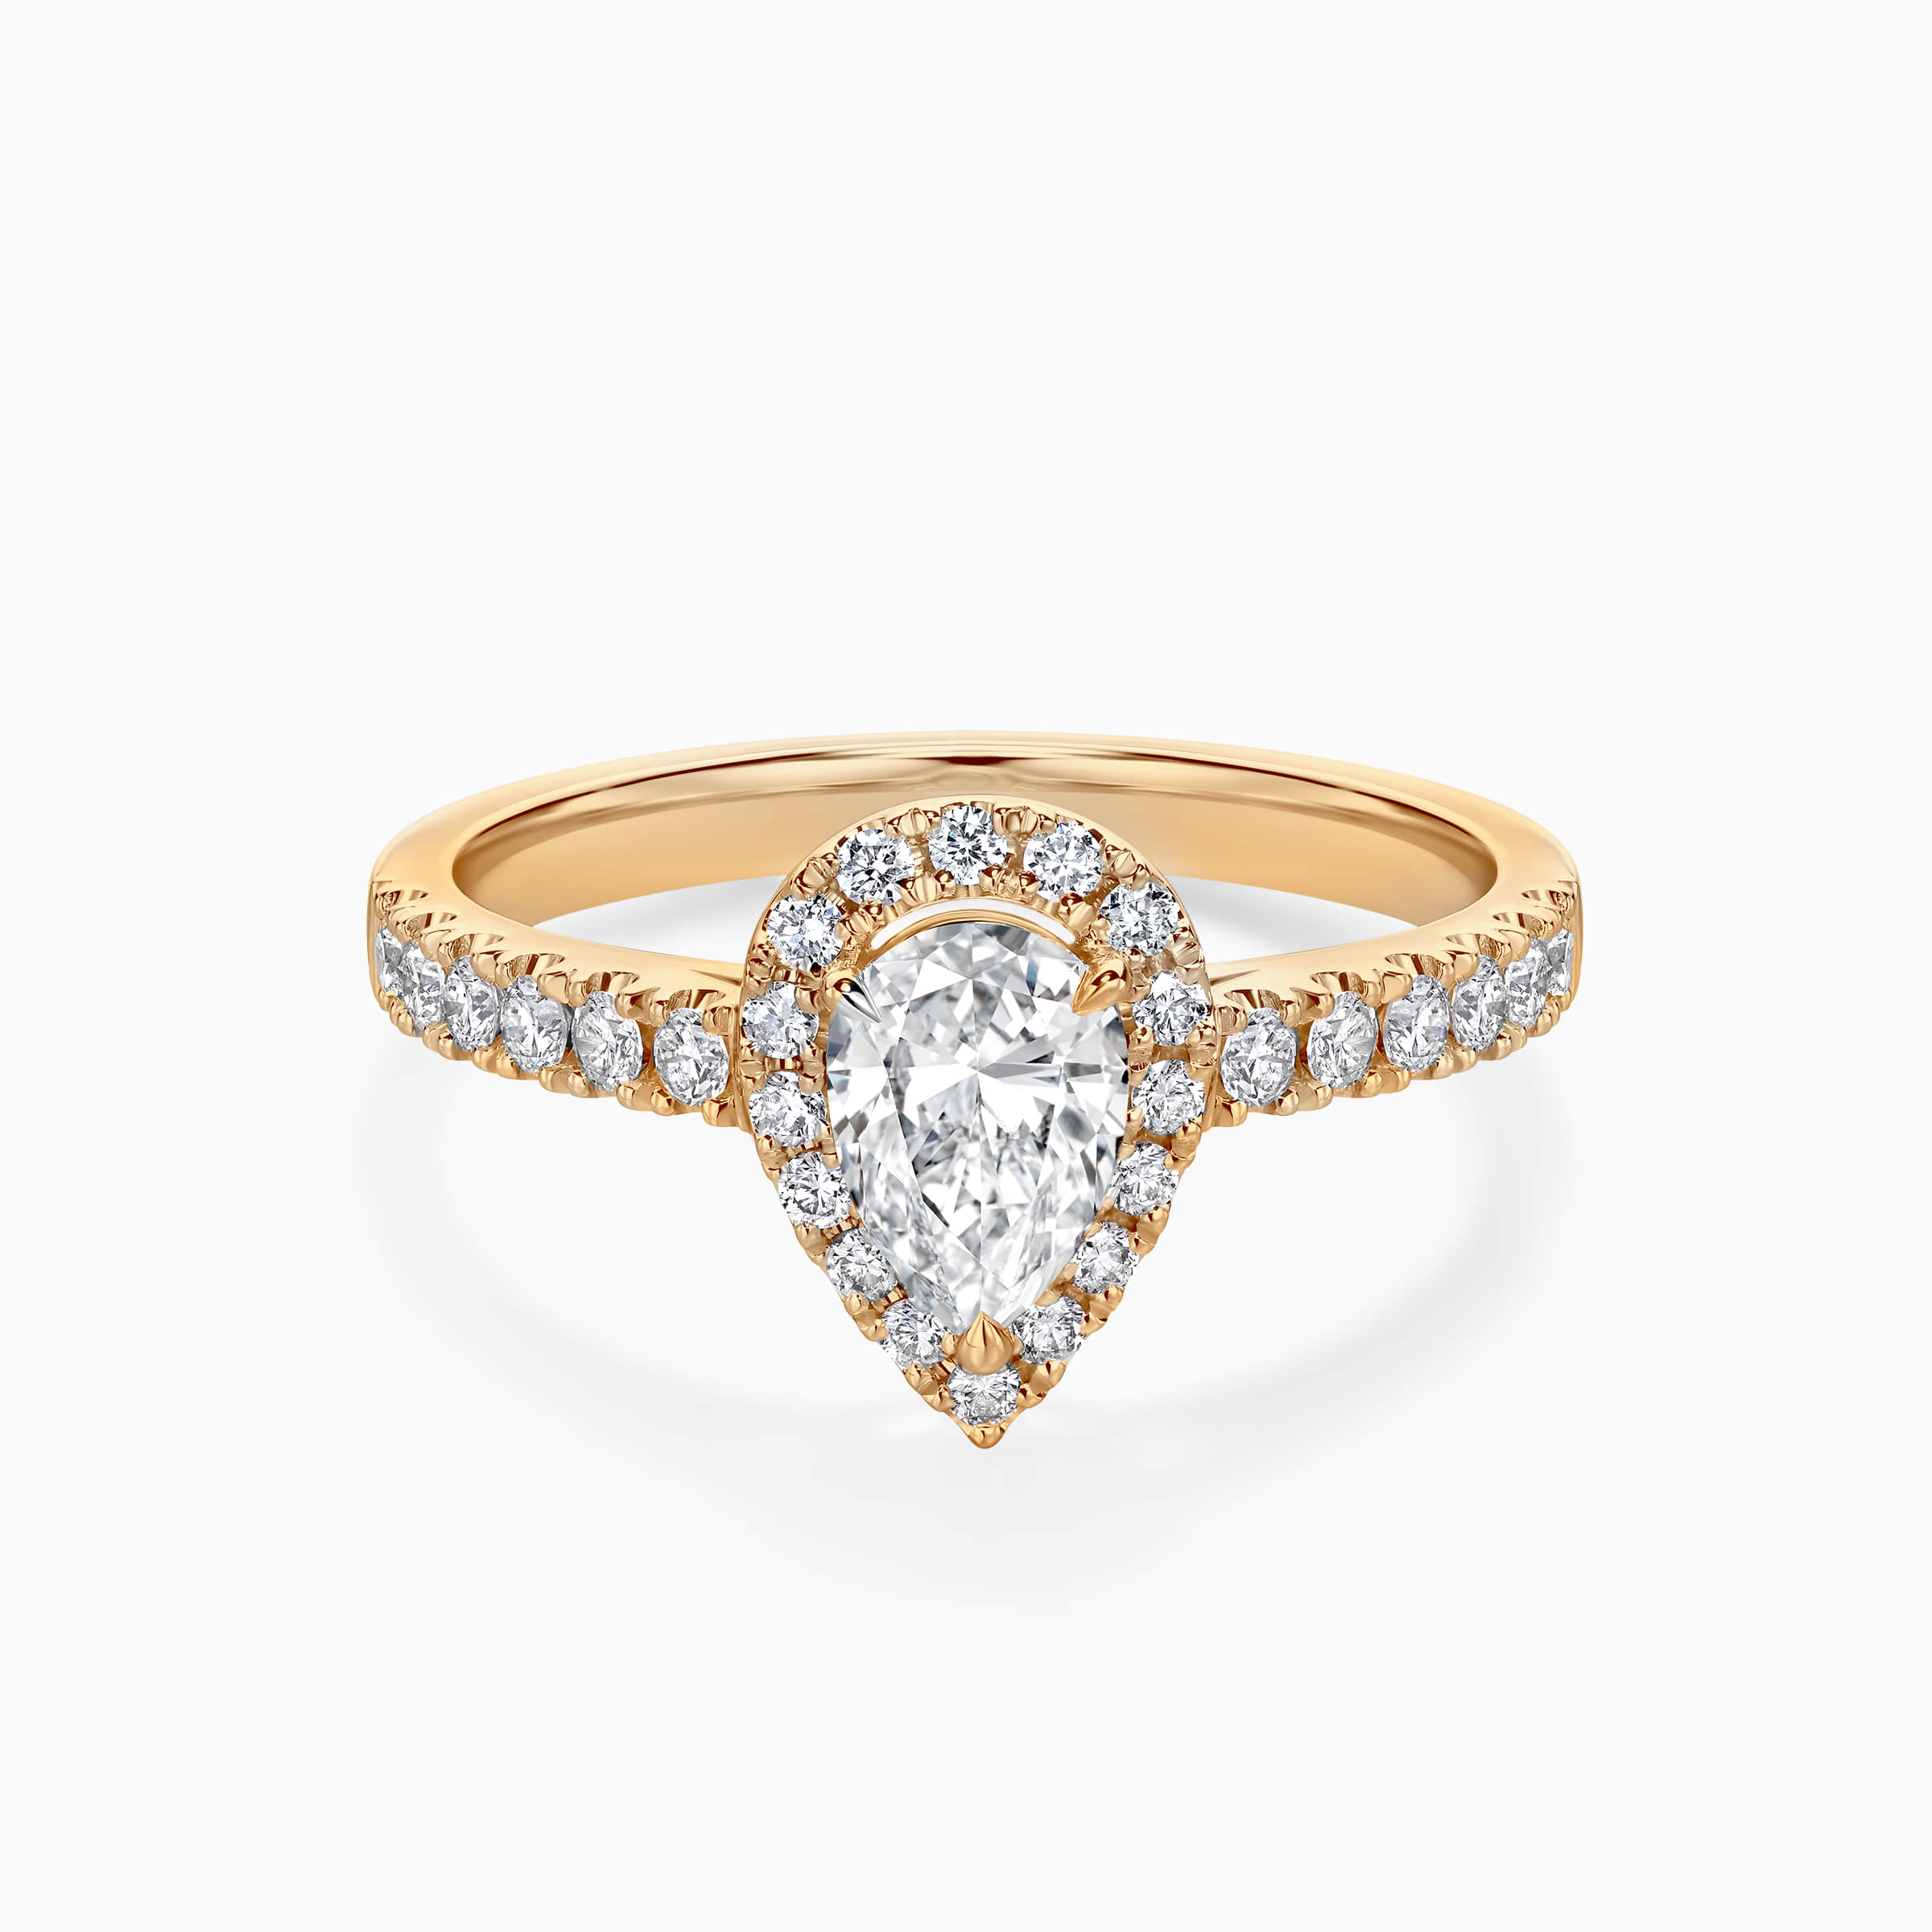 Darry Ring teardrop engagement ring in yellow gold